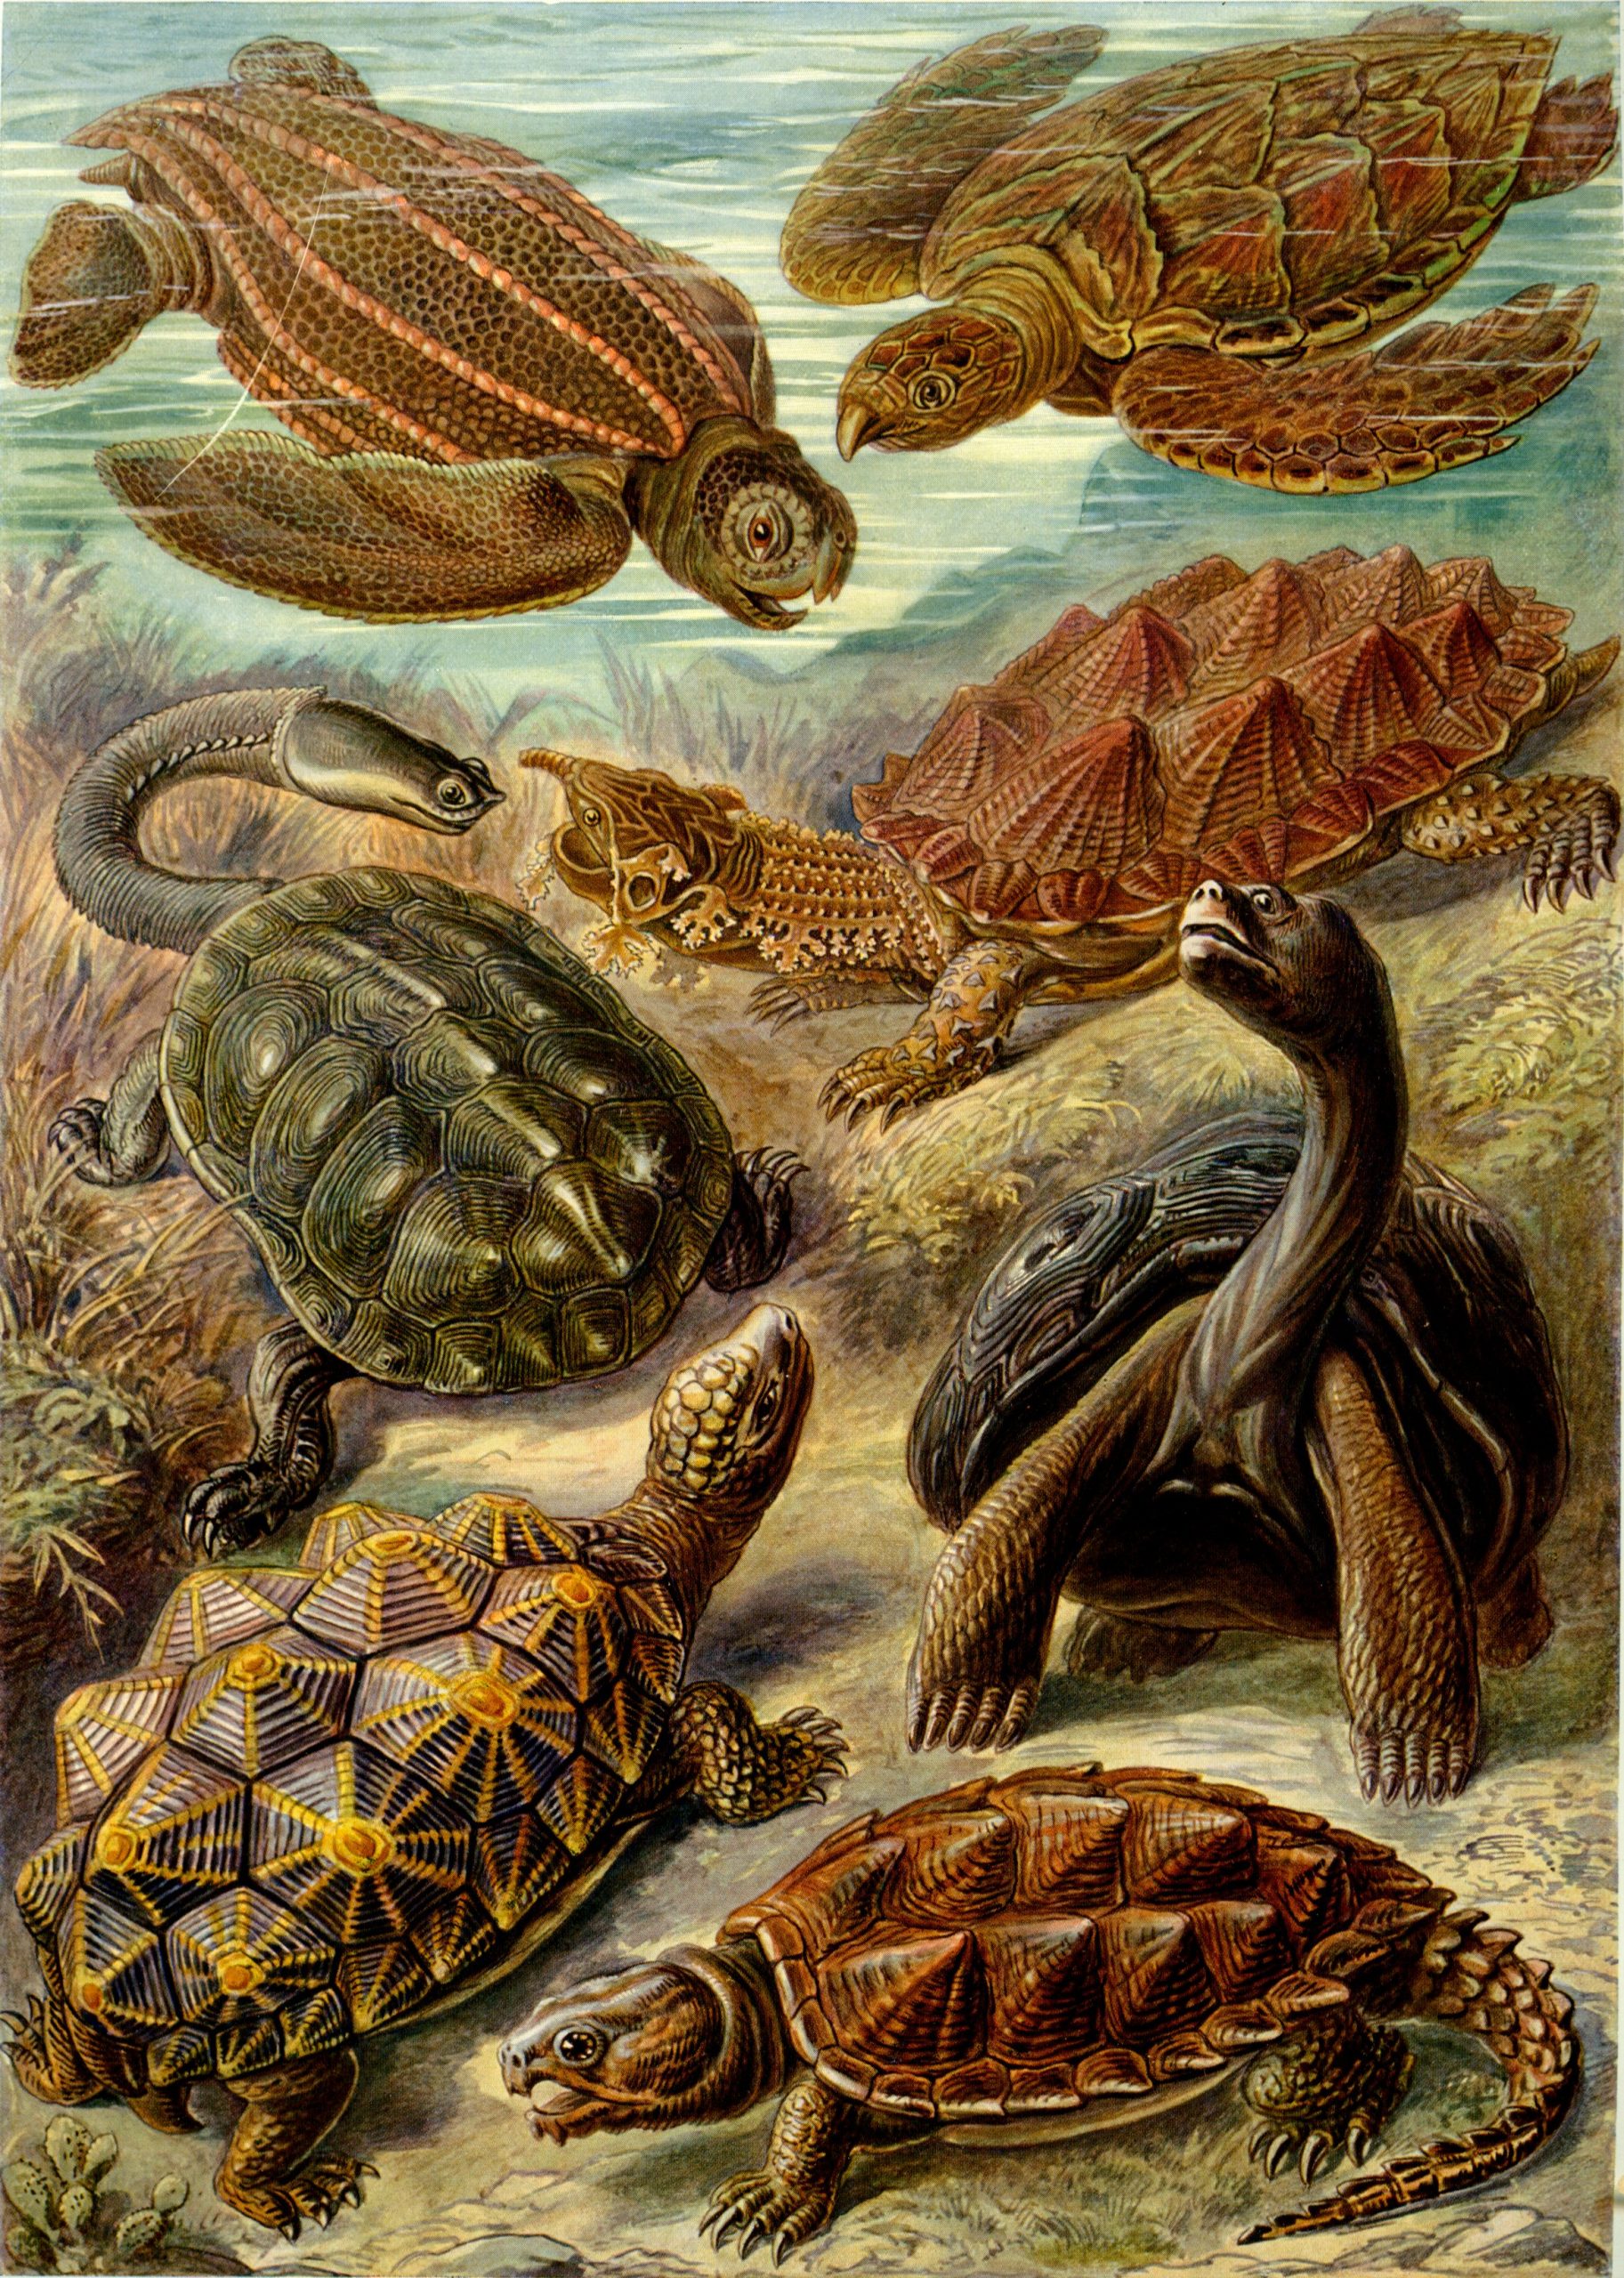 A detailed illustration of various sea turtles on a seabed